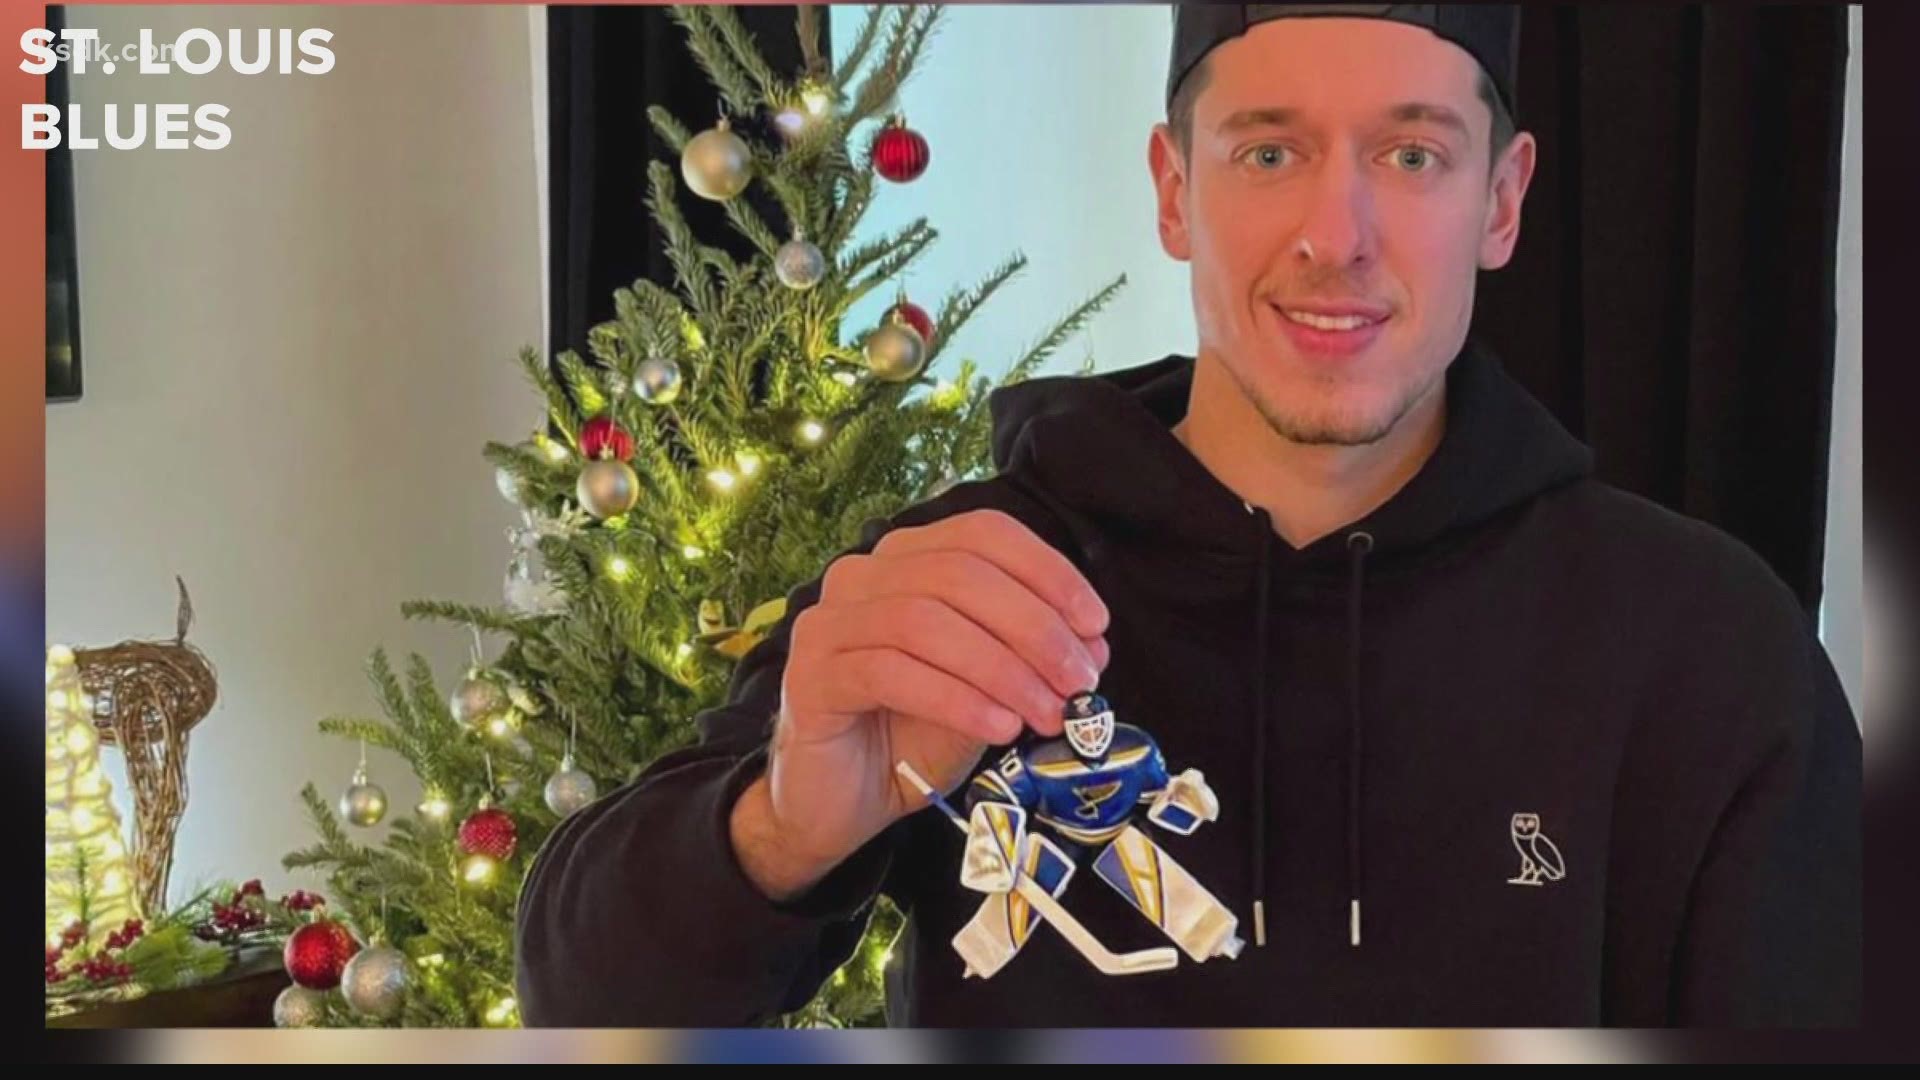 It might still be a while until we see Jordan Binnington and the Blues on the ice again, but for now, you can get him in ornament version for your Christmas tree